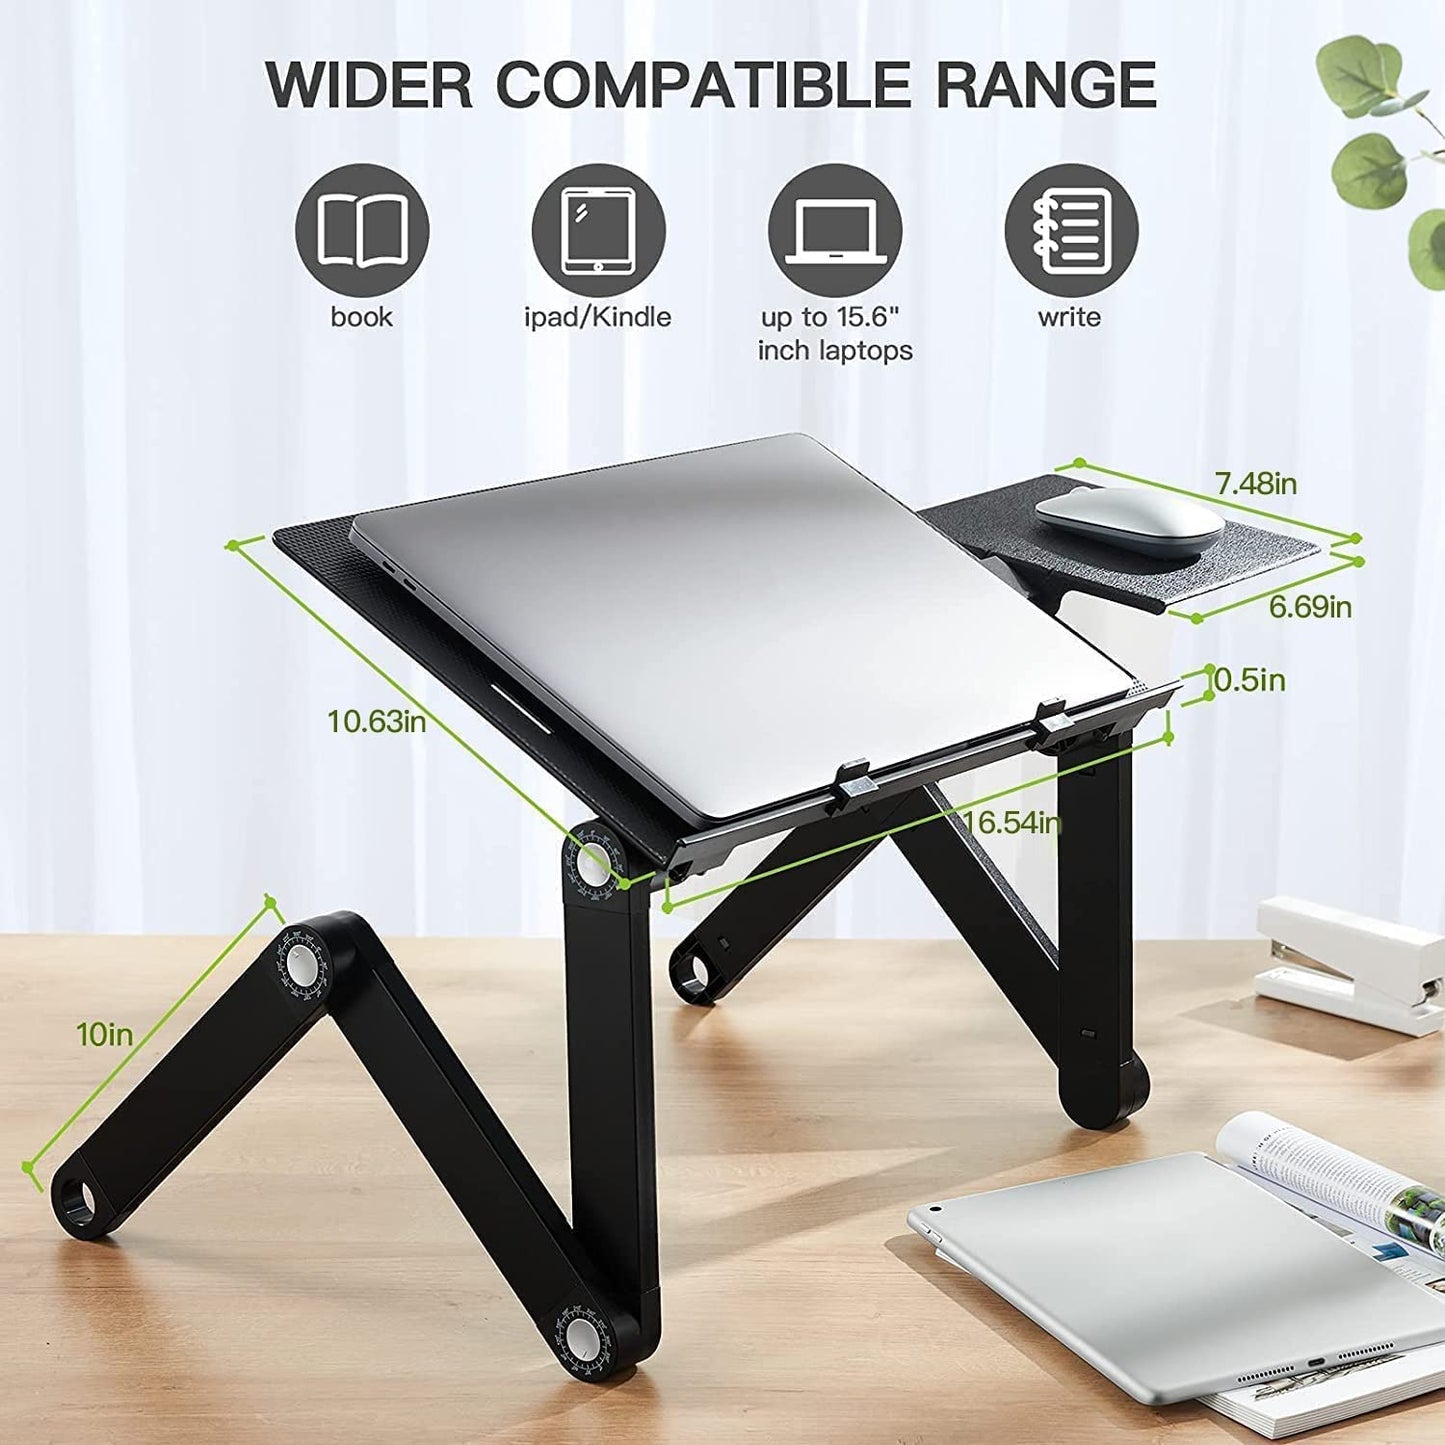 Adjustable Laptop Stand Fits Up To A 15.6" Laptop & Cools Your Laptop